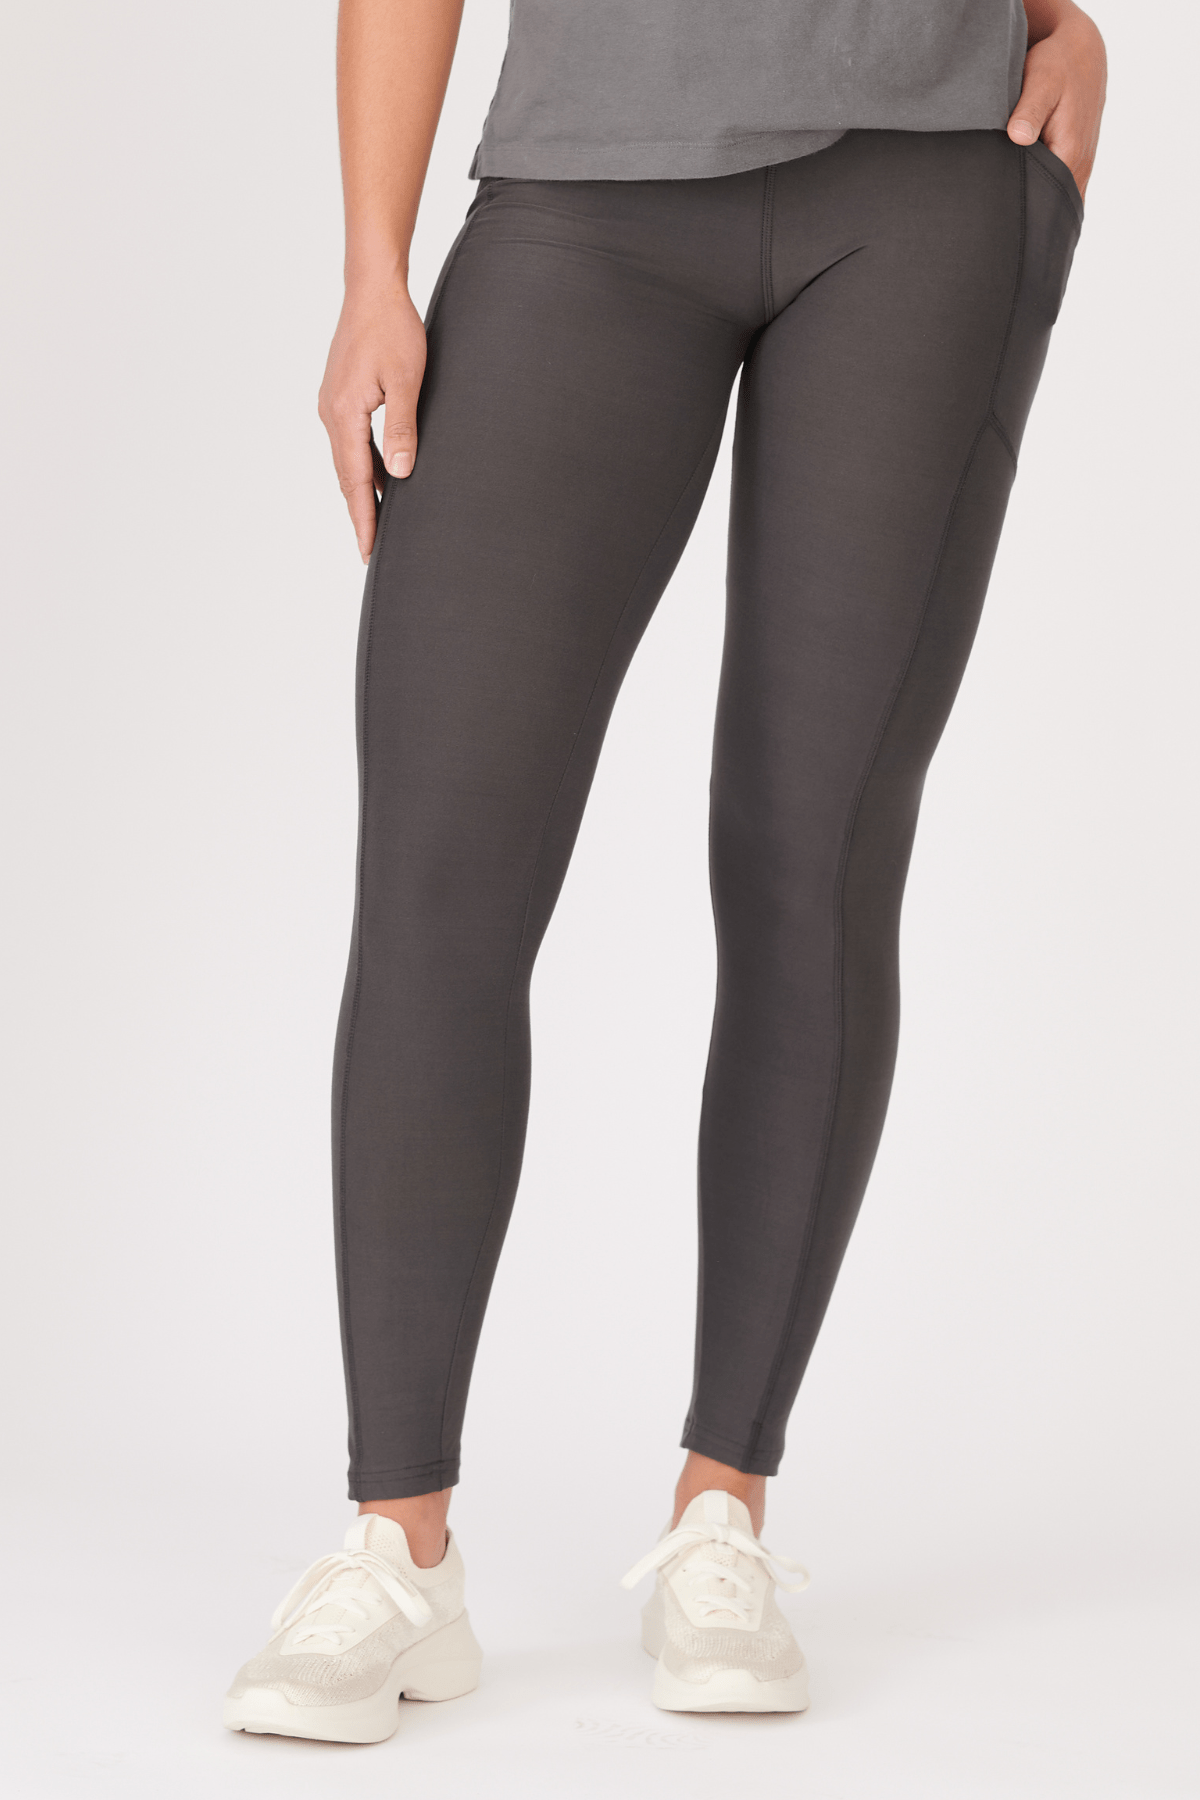 oolala Leggings Solid Charcoal with Pockets 🦋 oolala ButterflySoft™ | Solid Charcoal with Pockets Women's Leggings